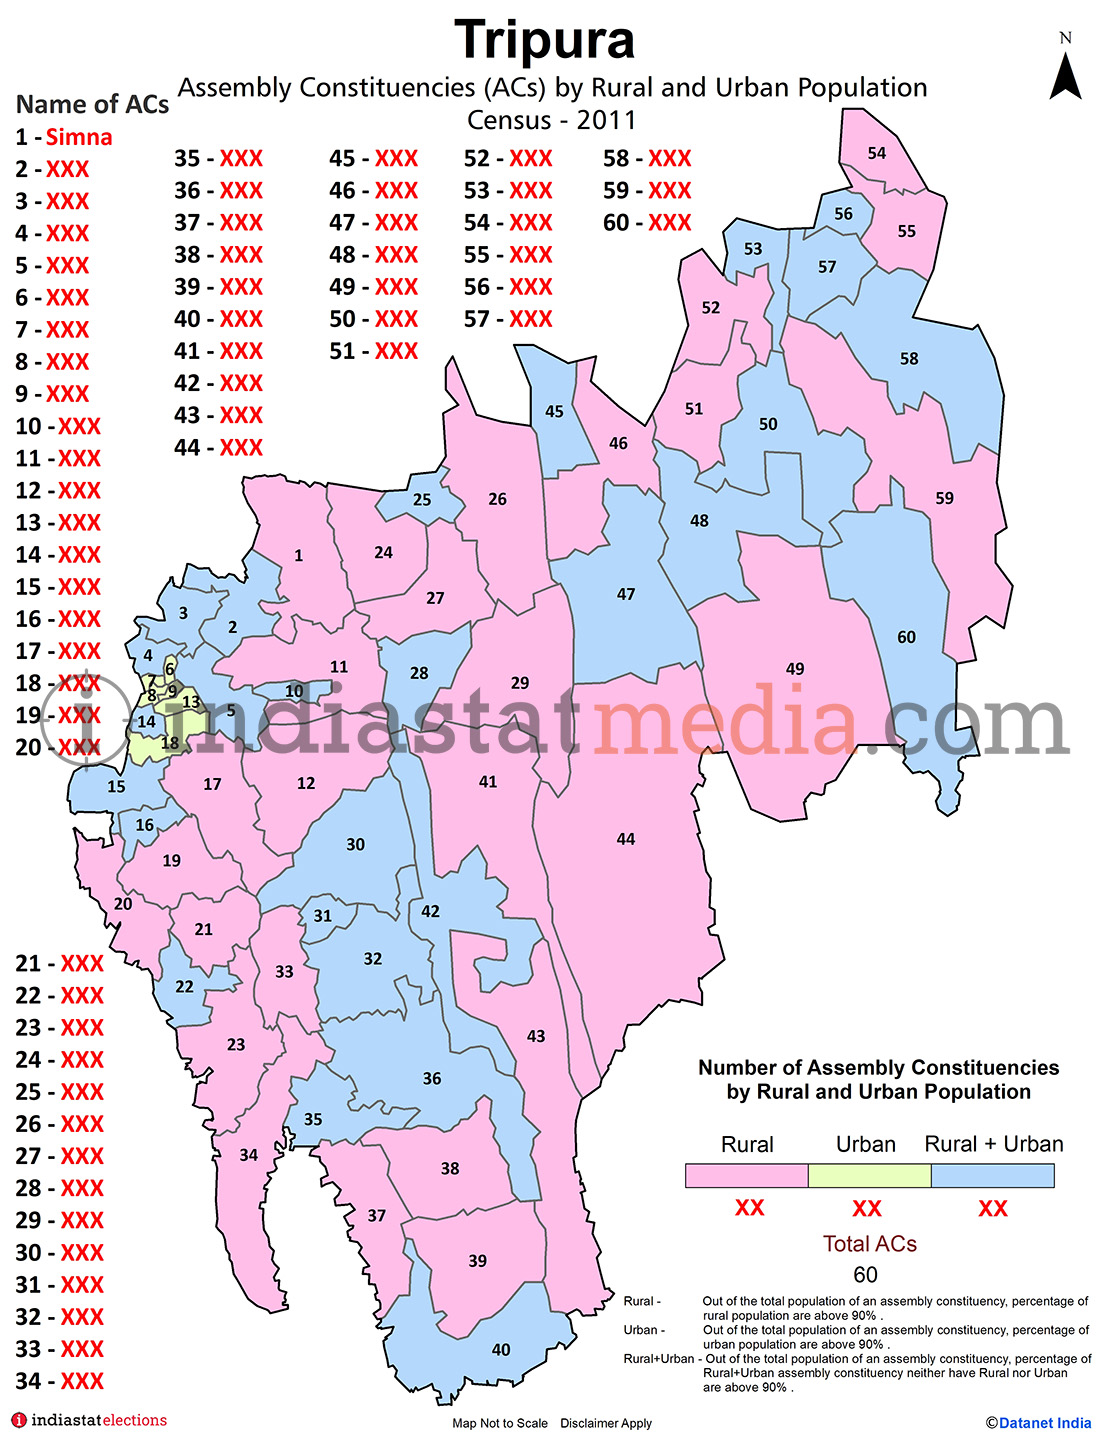 Assembly Constituencies (ACs) by Rural and Urban Population in Tripura - Census 2011